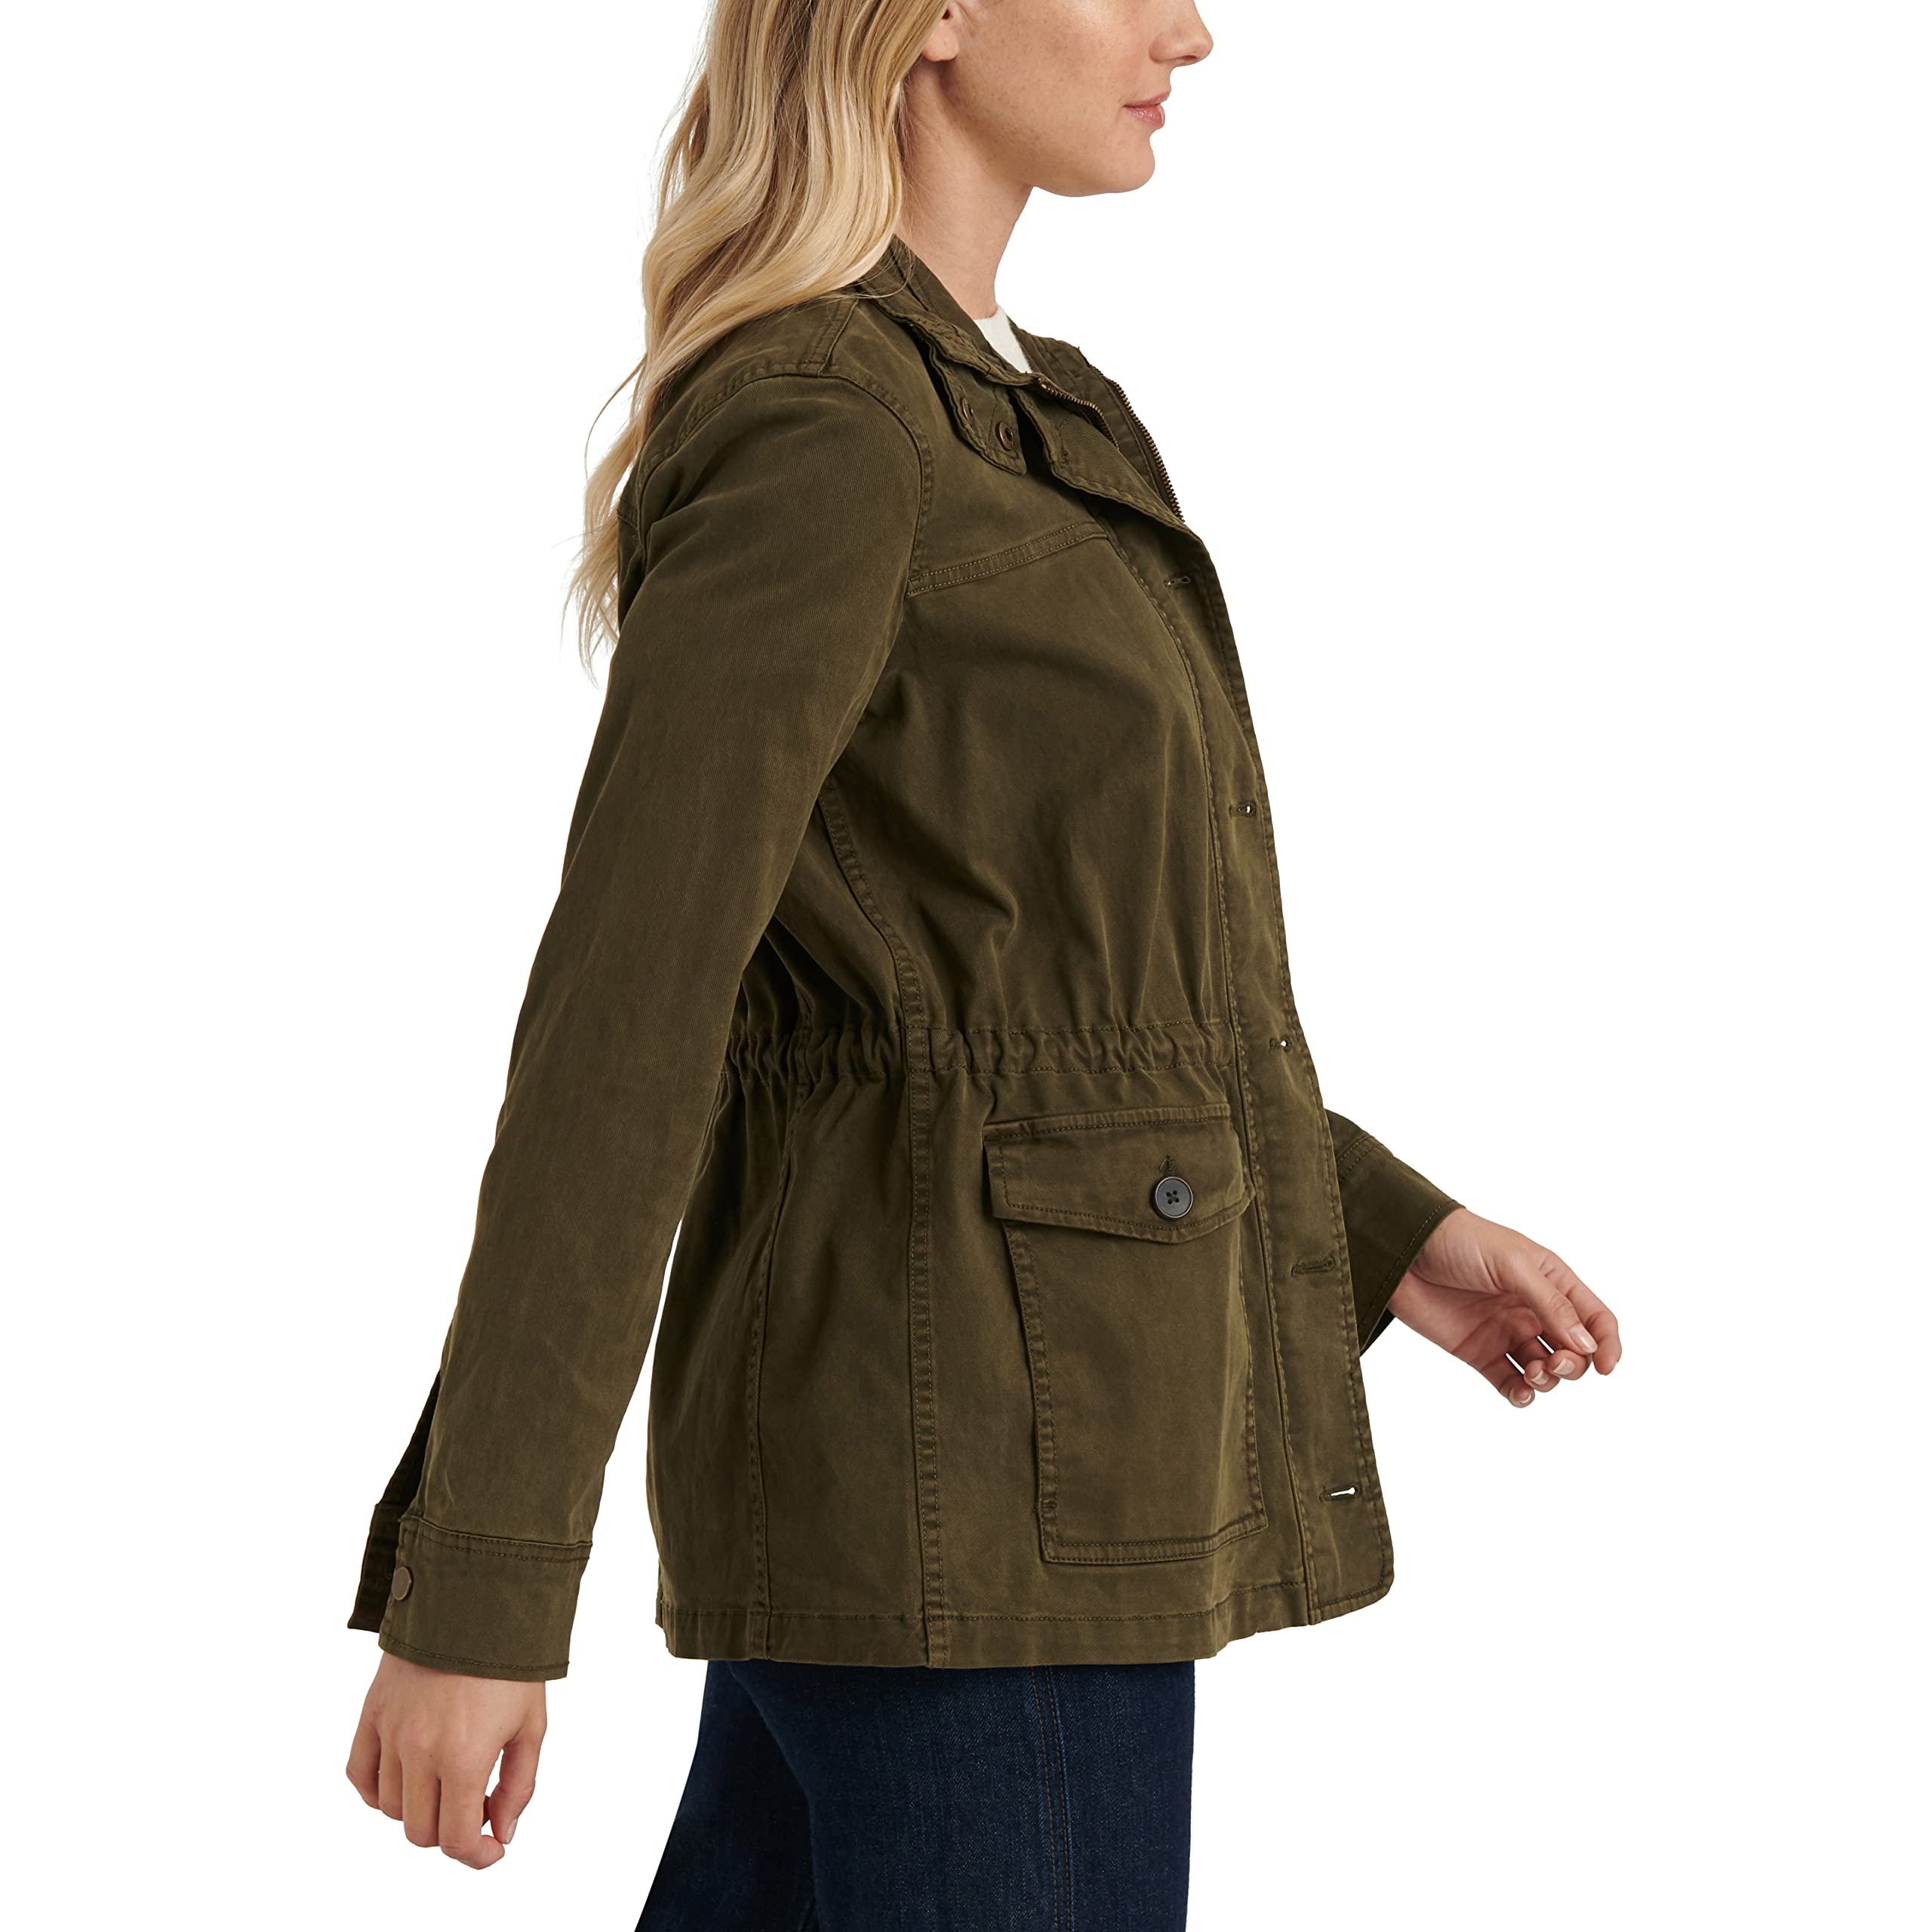 Lucky Brand Women's Long Sleeve Button Up Two Pocket Utility Jacket